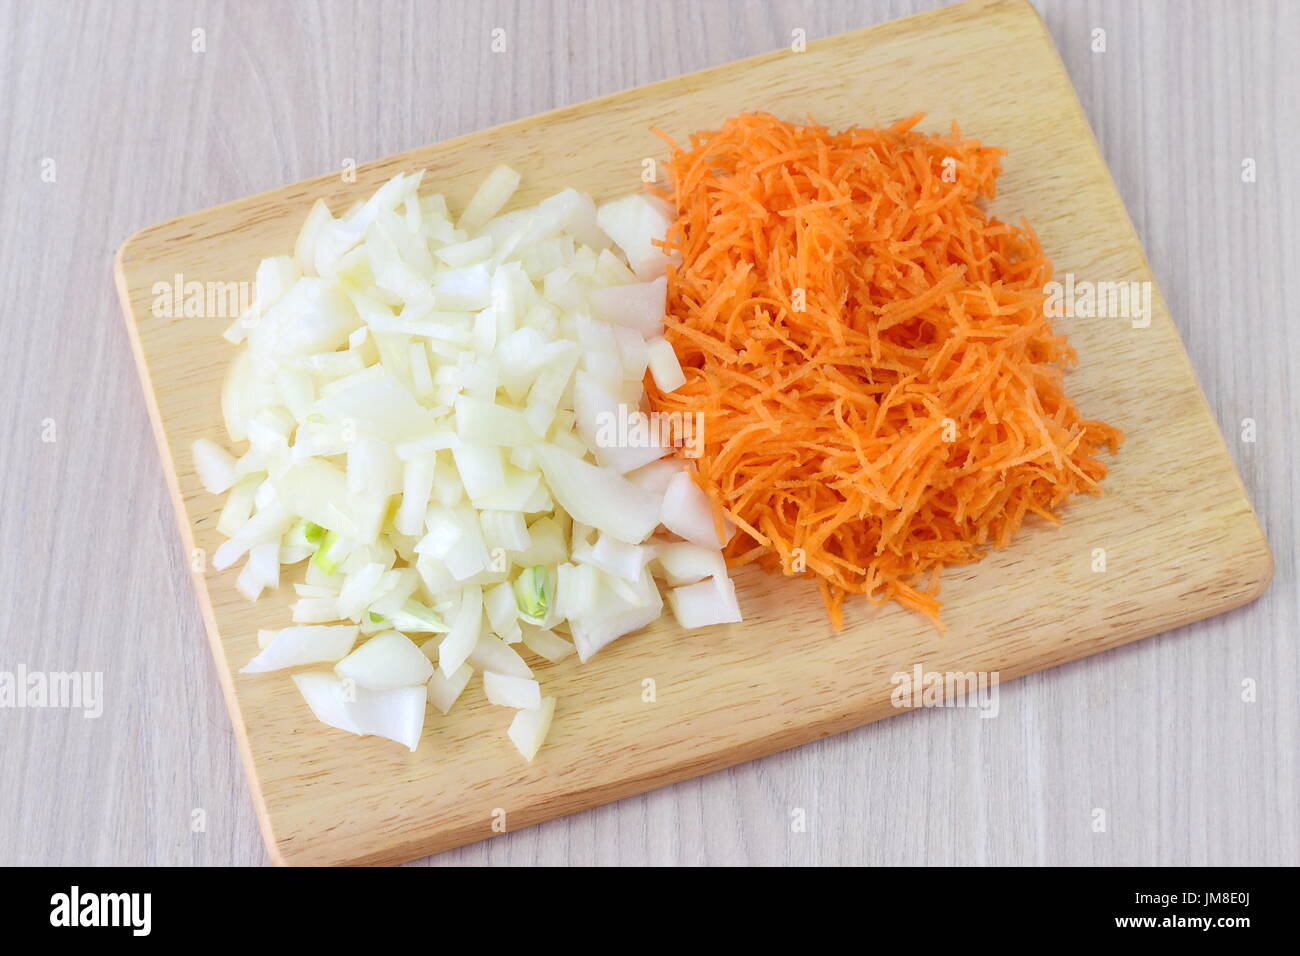 Step by step cooking. Cut onion and carrots on a wooden cutting board on a wooden background. Stock Photo